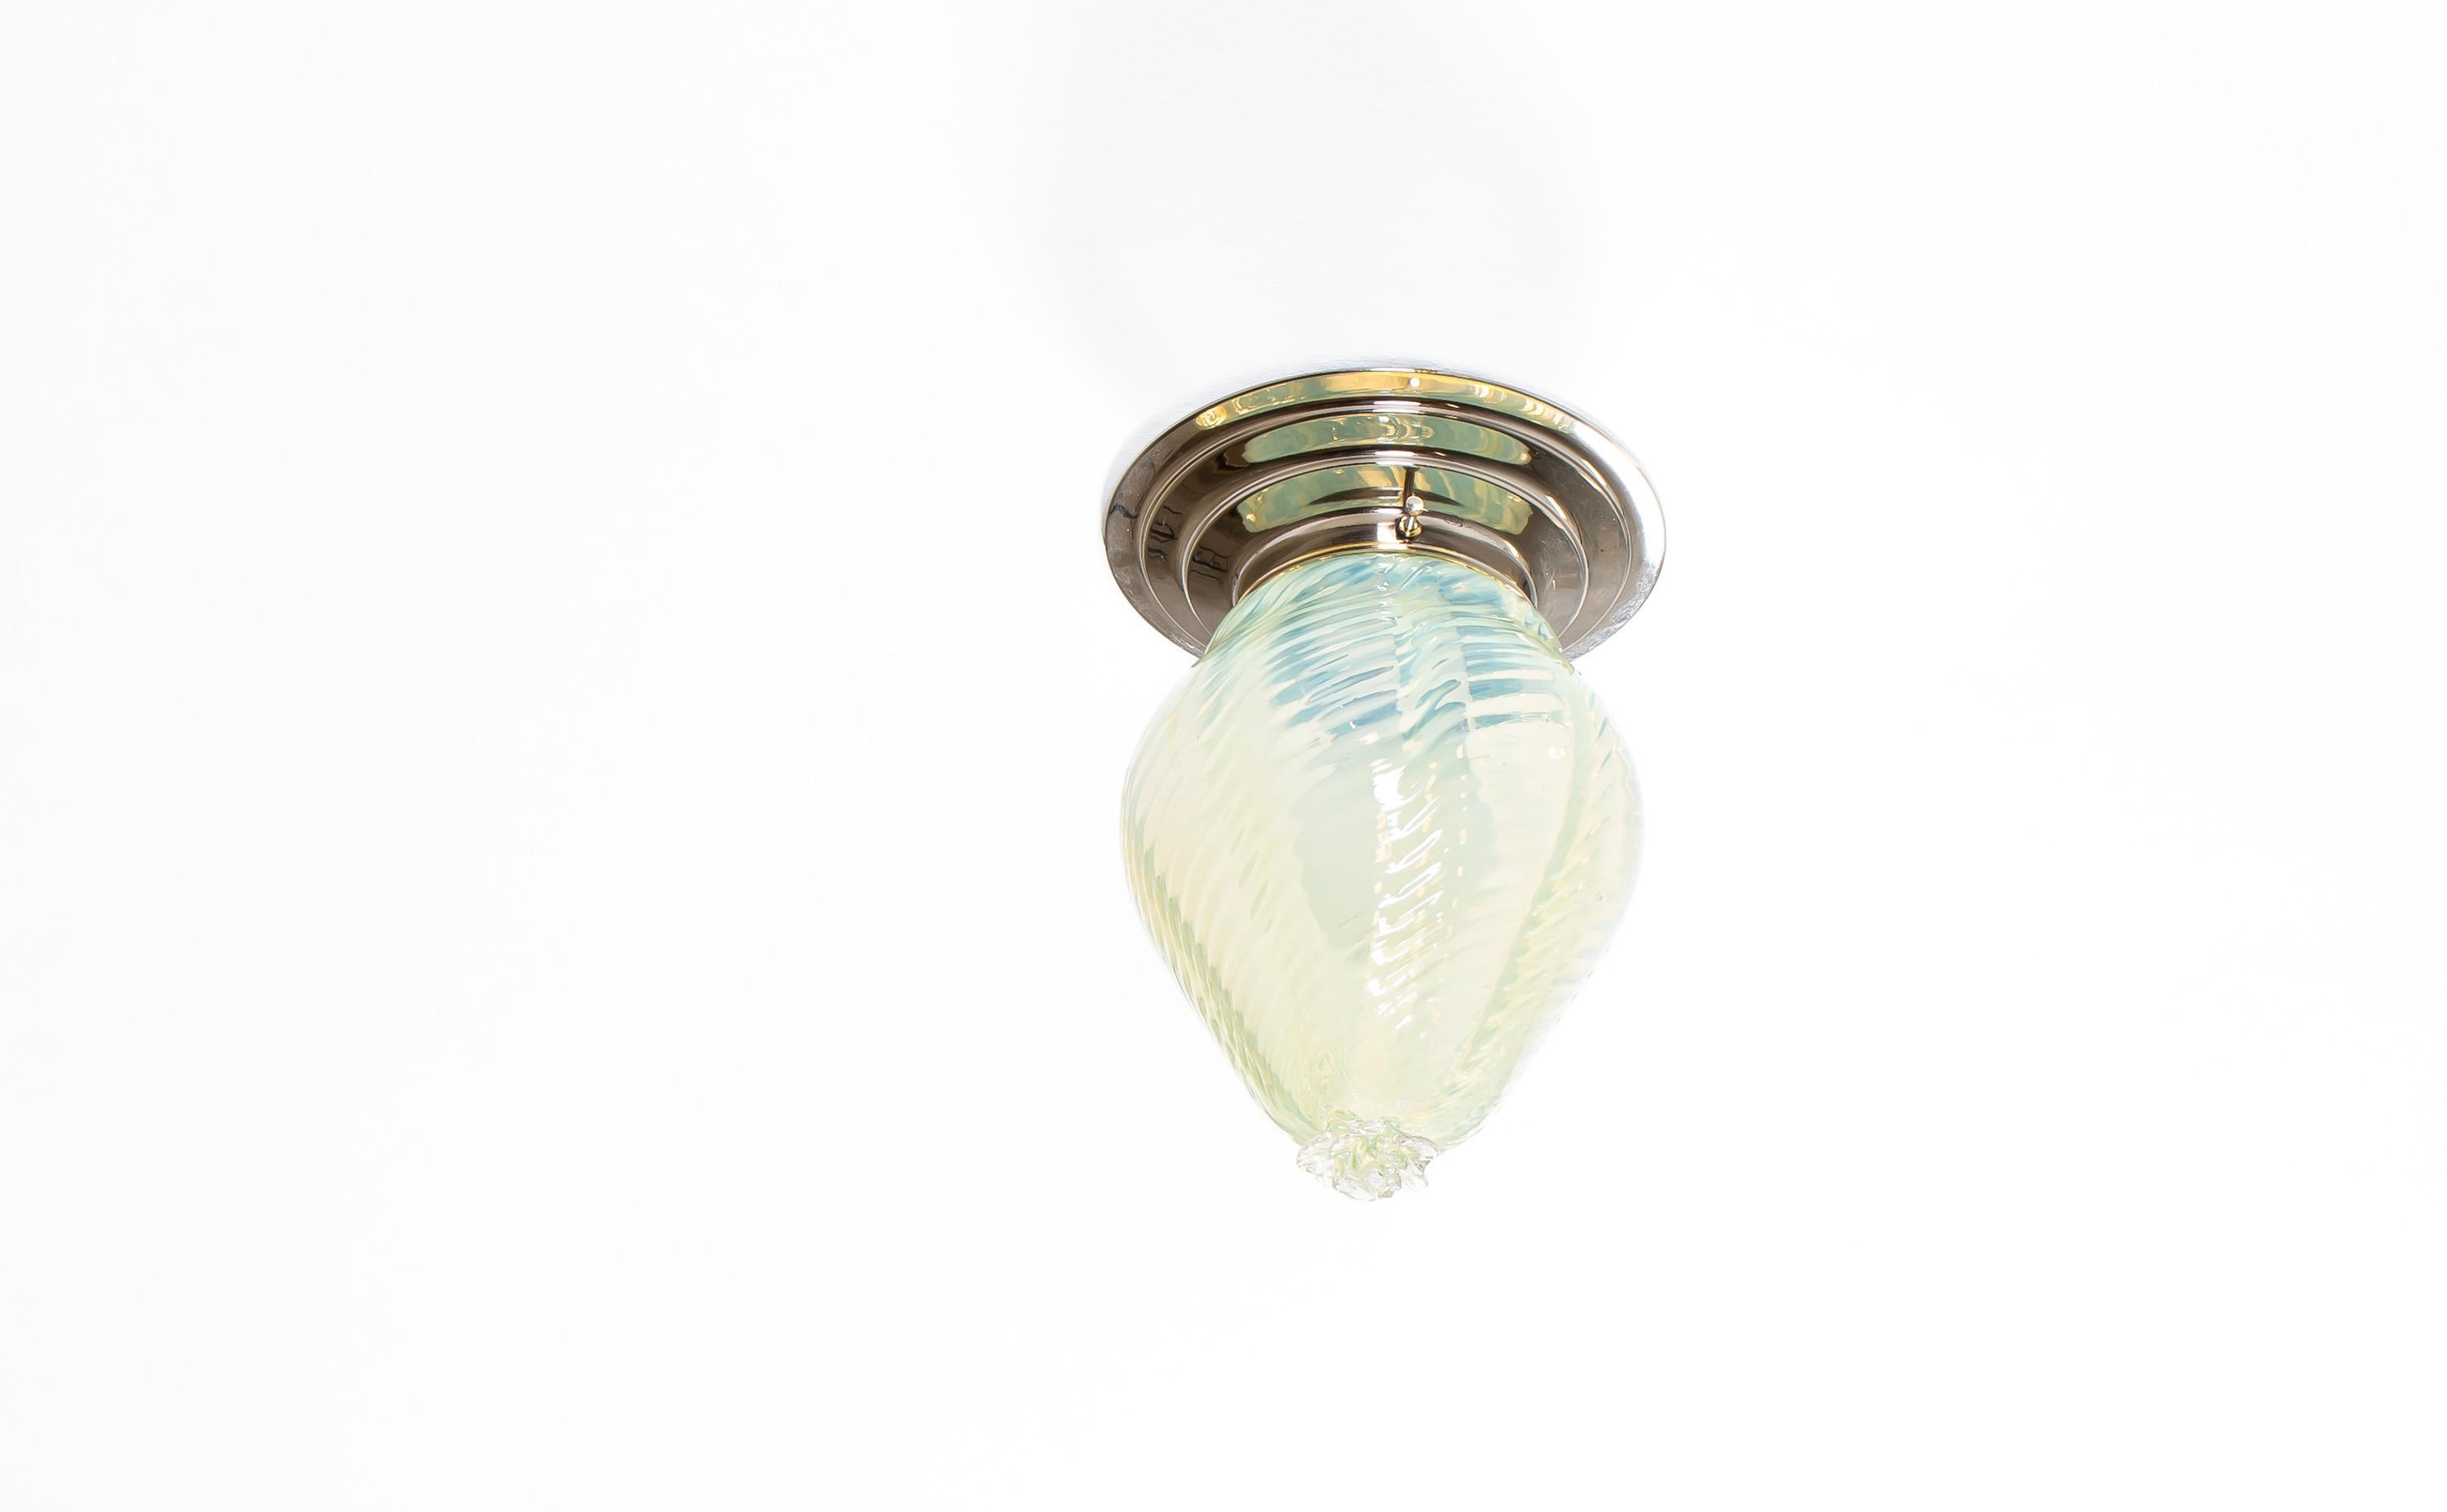 Decorative ceiling light in art-glass with chrome metal base. Designed and made in Norway from ca 1950s first half. The lamp is fully working and in good vintage condition. It is fitted with one E27 bulb holder (works in the US) and carries a max